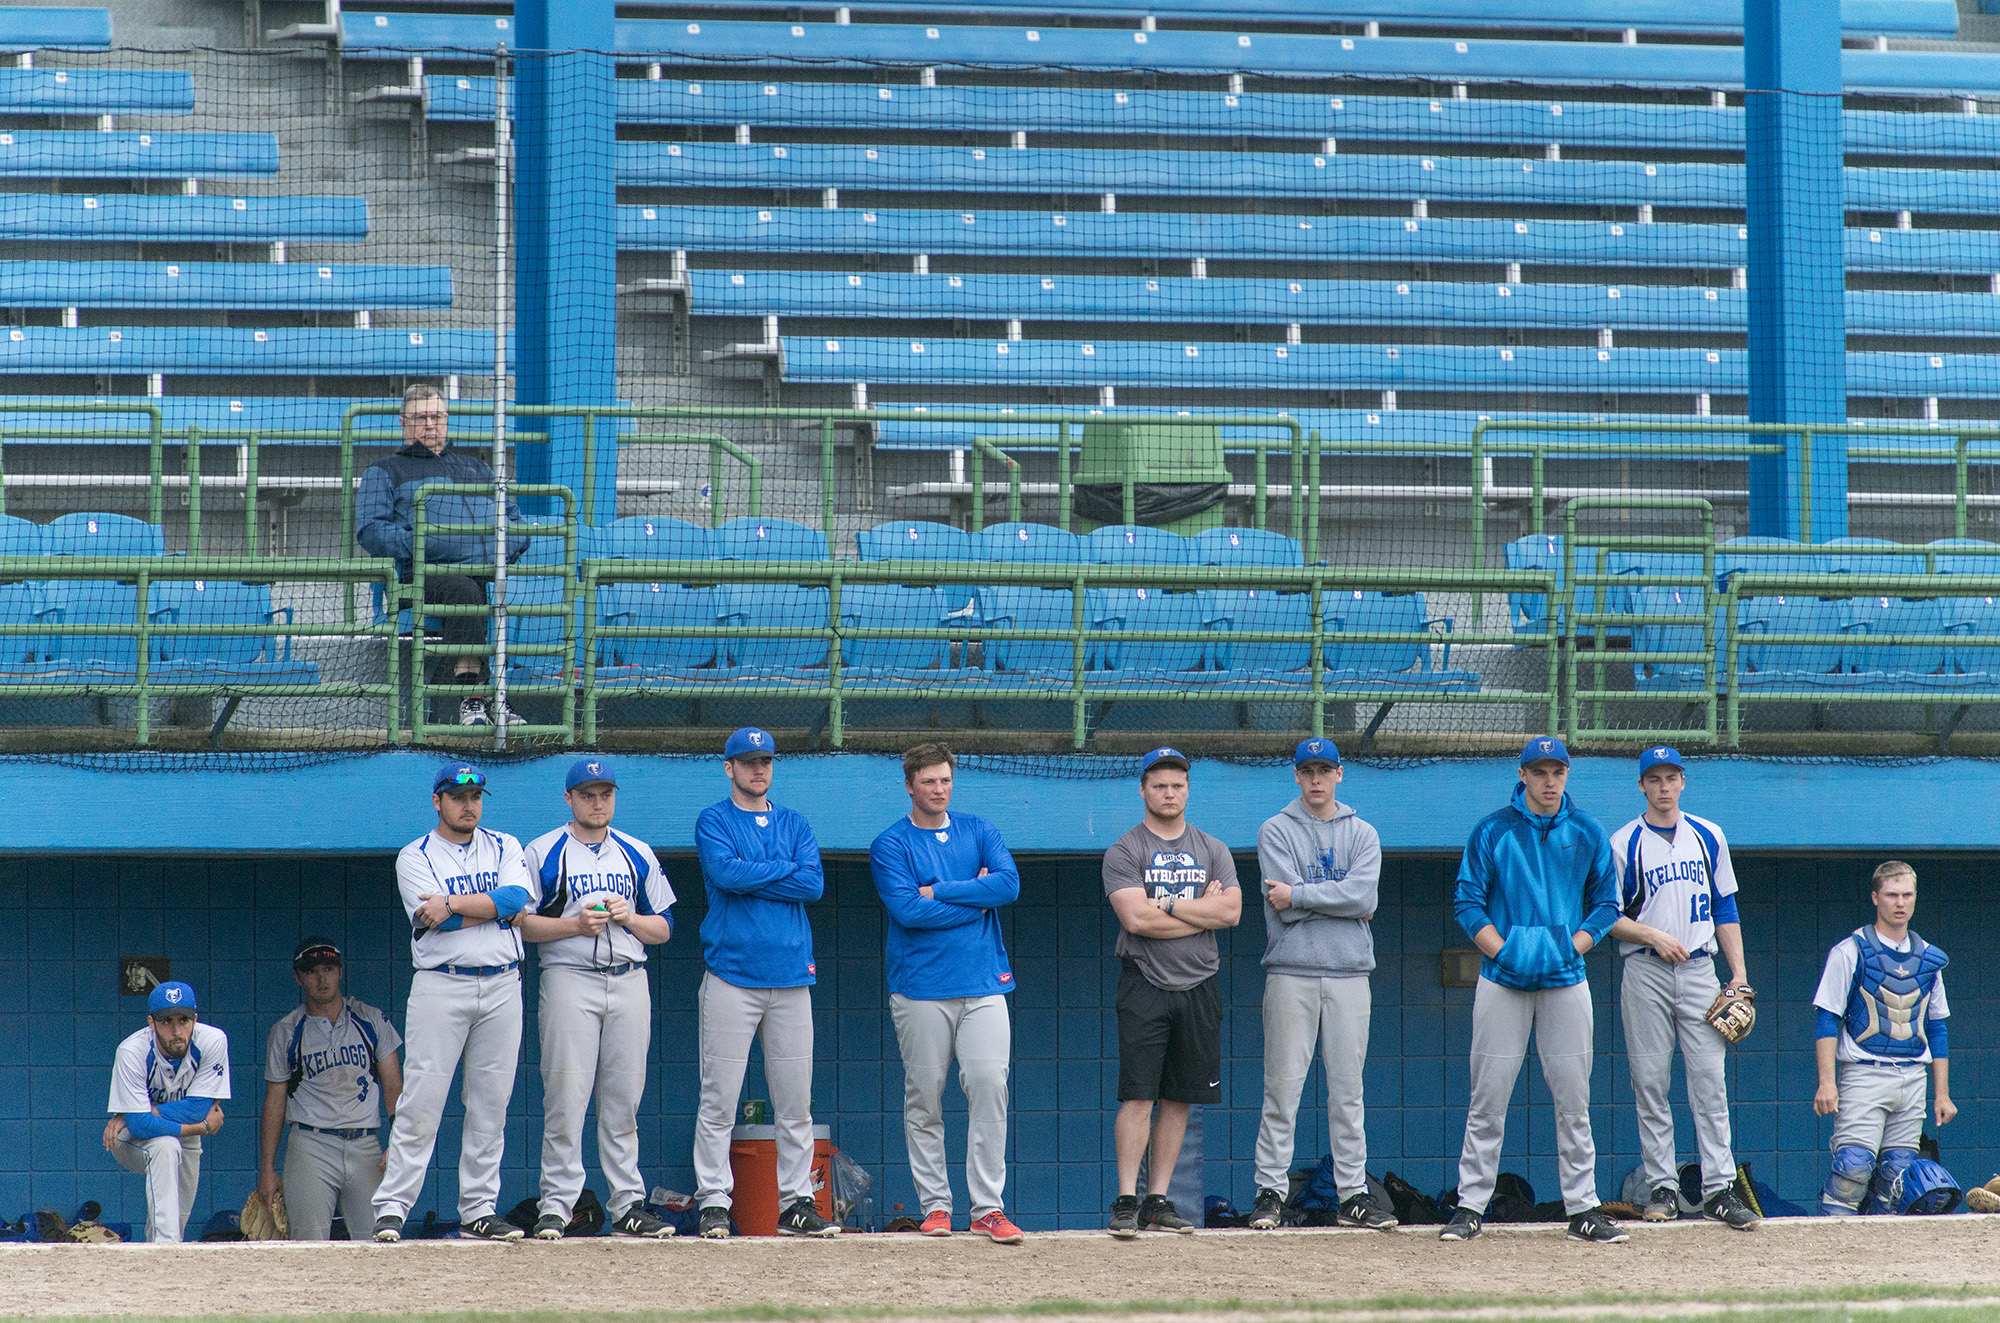 KCC baseball players watch the team play from the dugout during a home game at Bailey Park in Battle Creek.